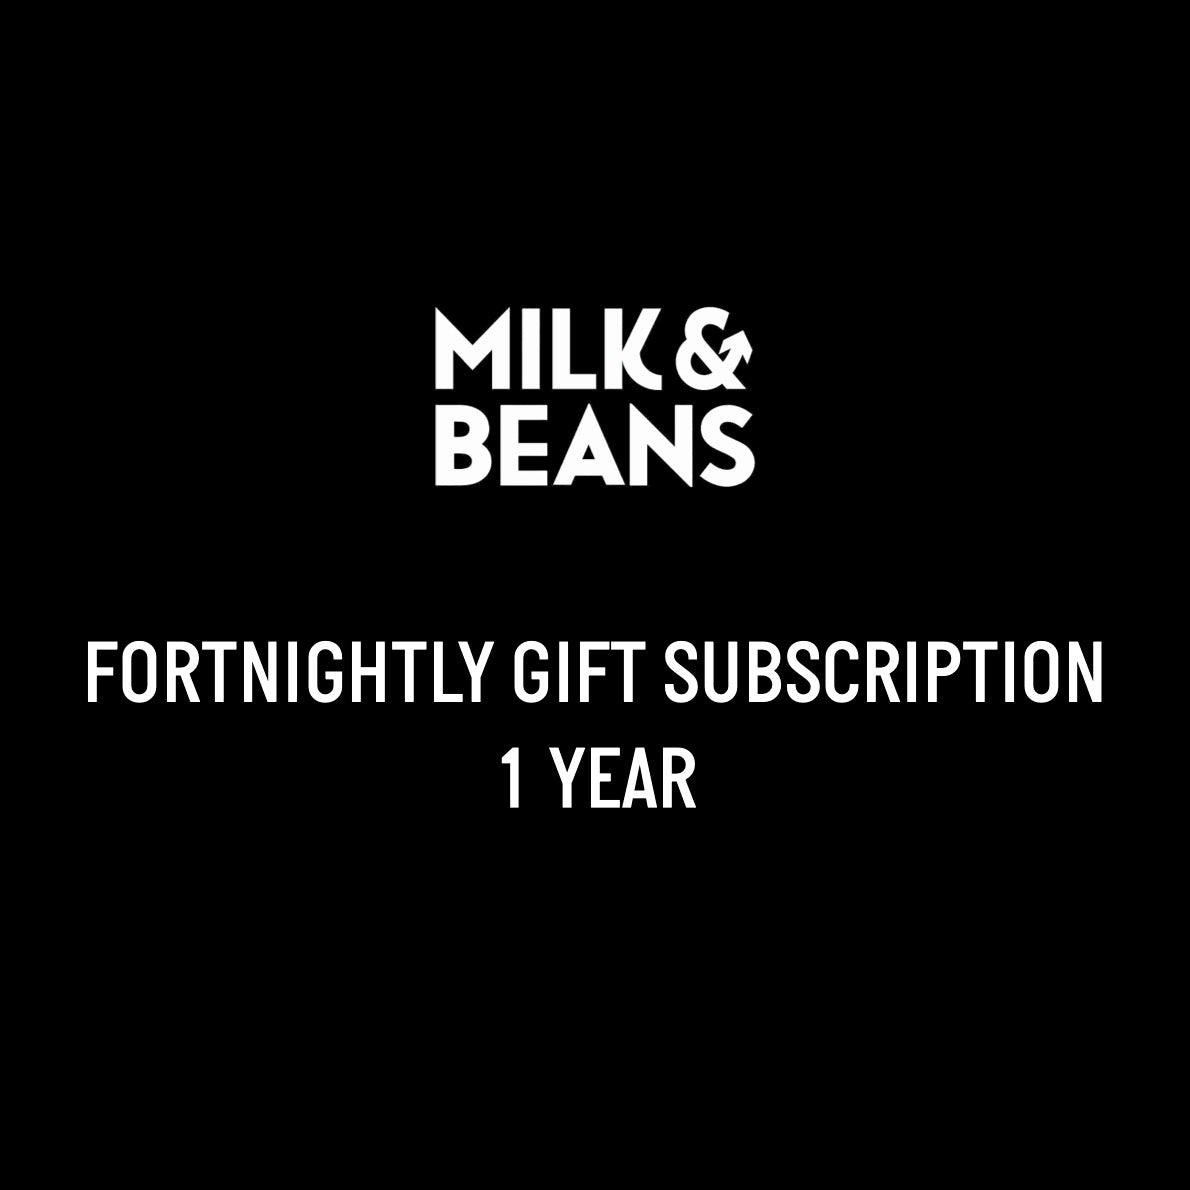 Fortnightly Gift Subscription - 1 Year